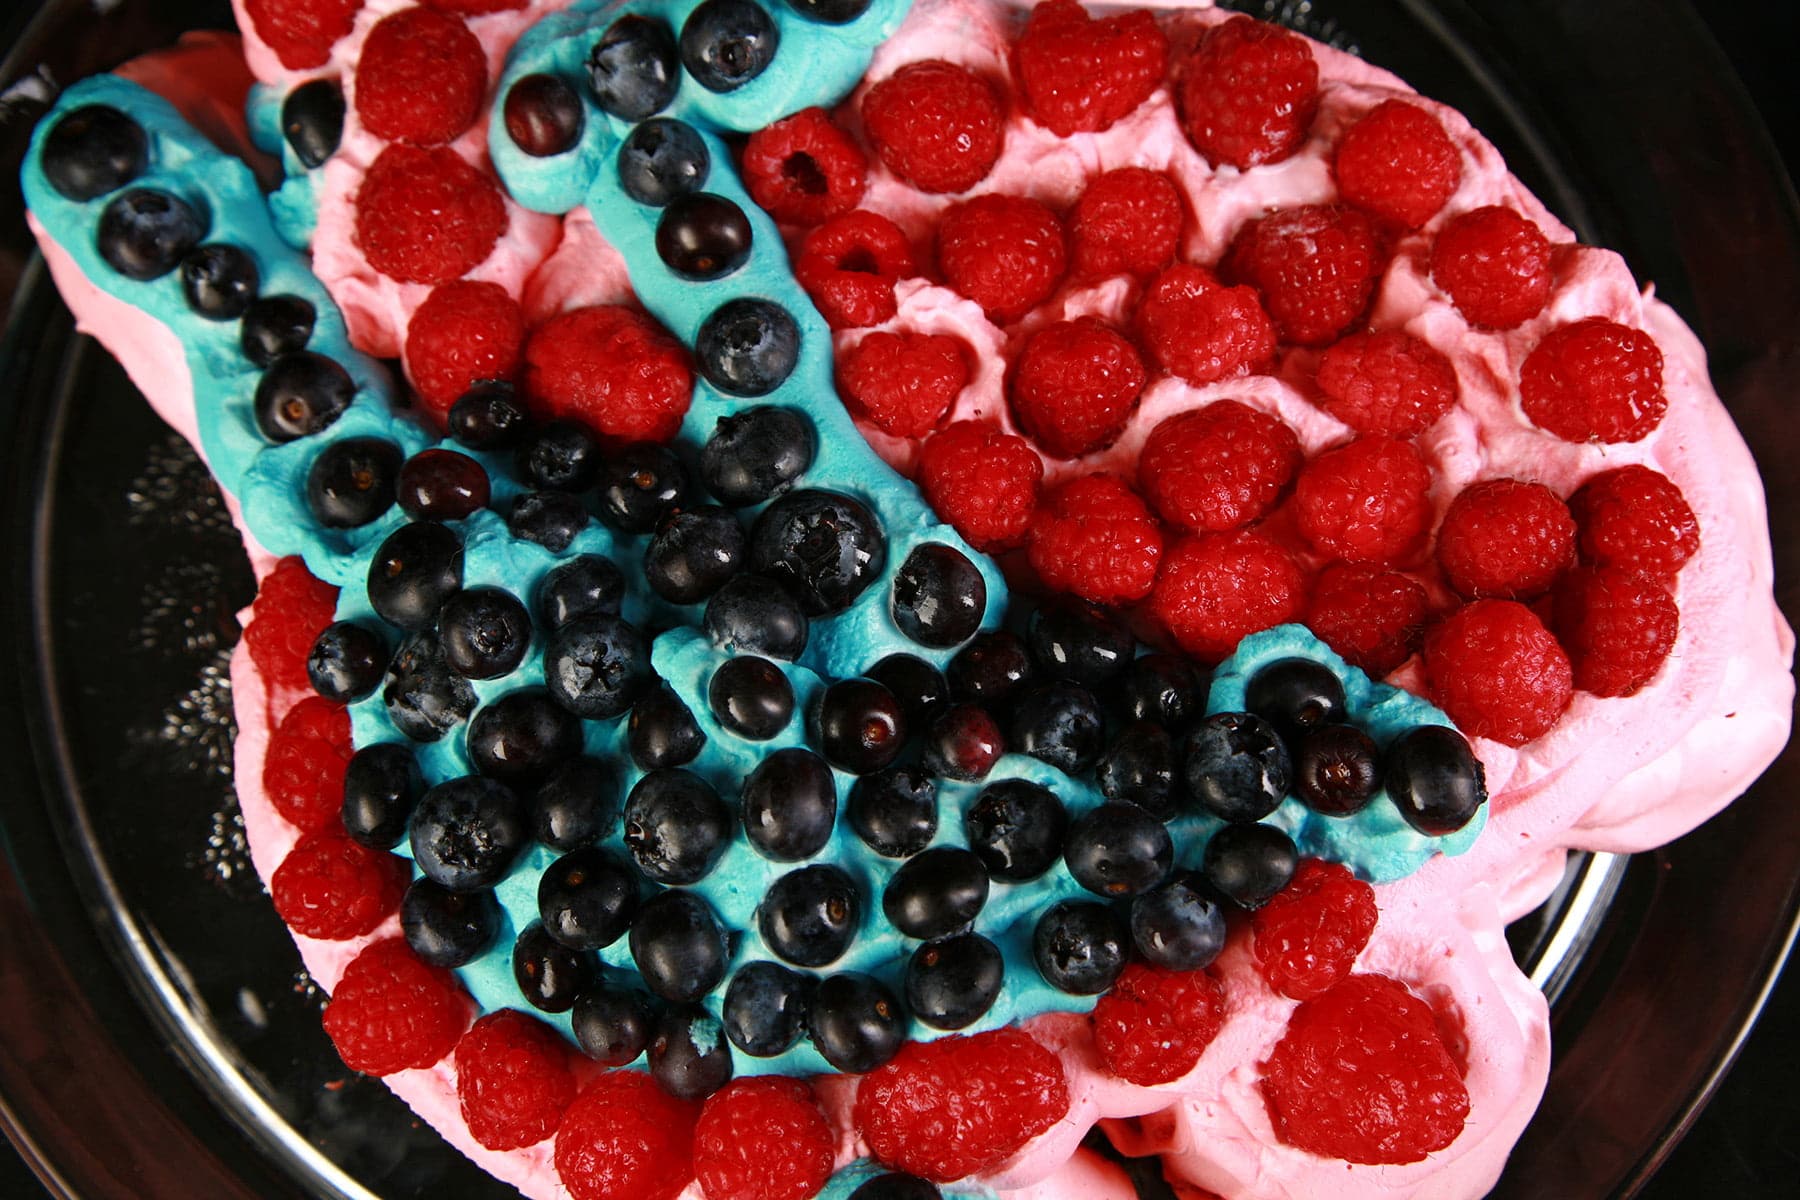 A close up view of a pink pavlova, with pink whipped cream, blue whipped cream, blueberries, and raspberries.